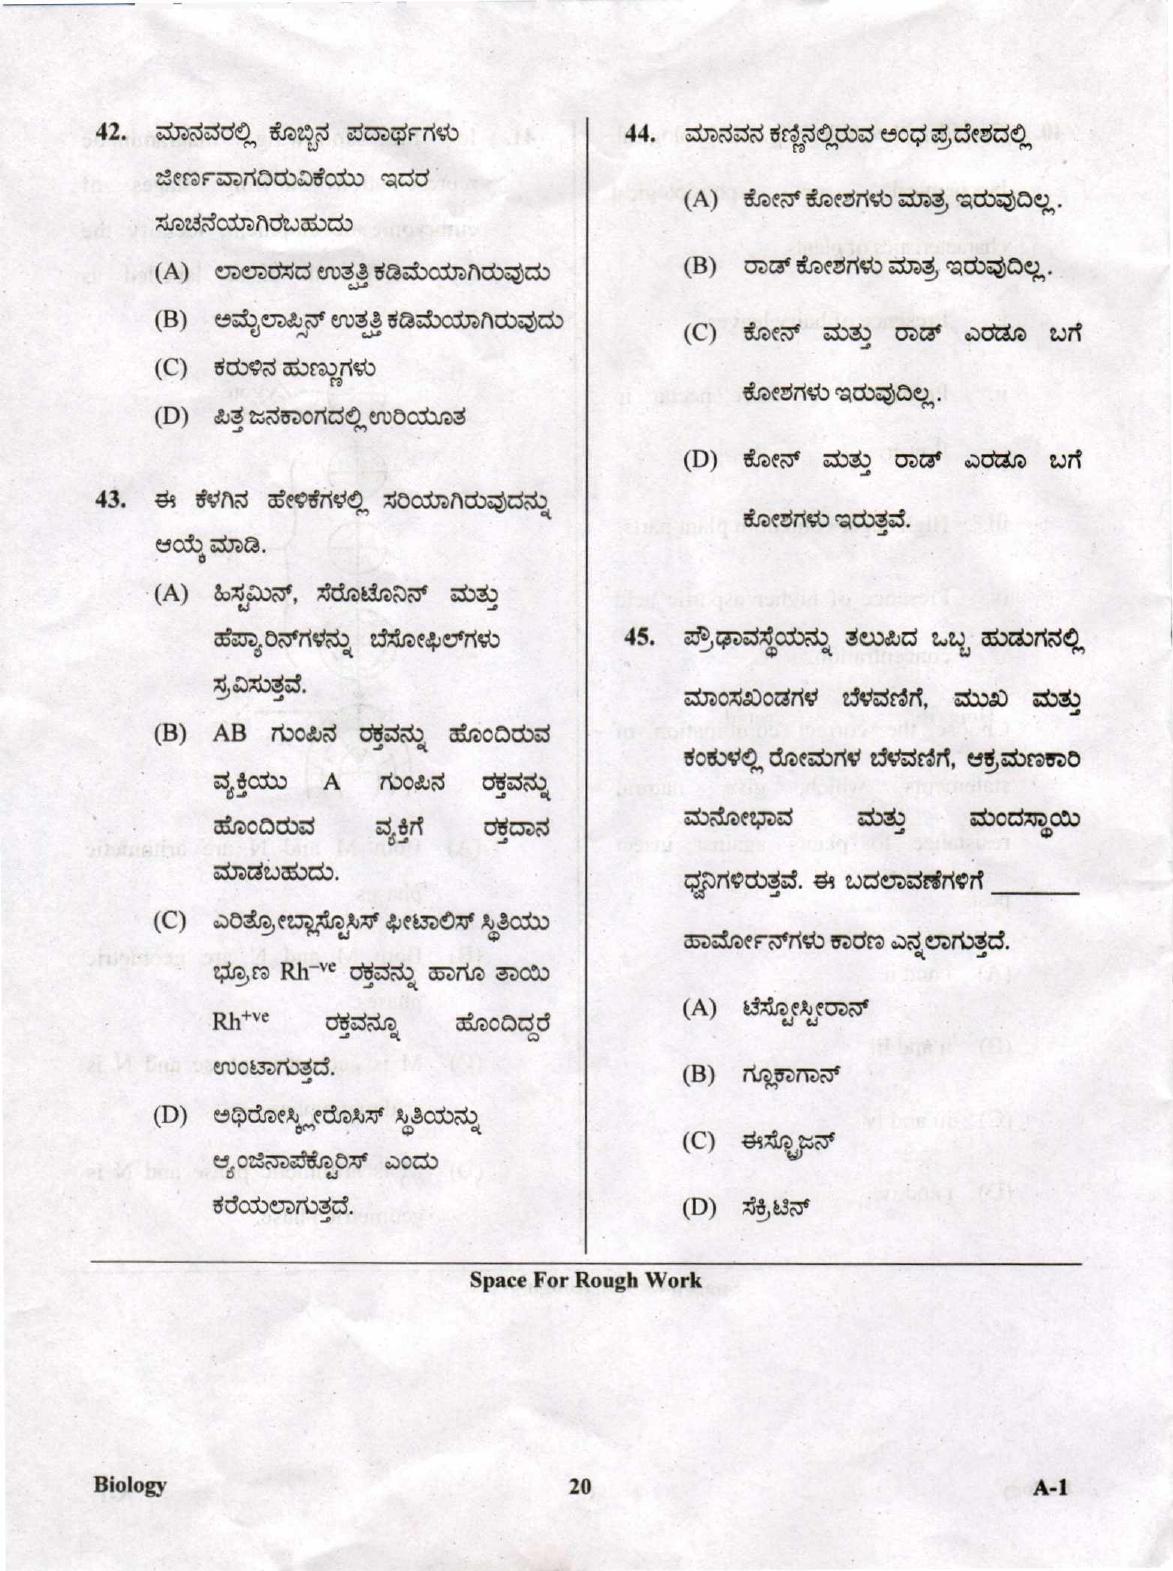 KCET Biology 2019 Question Papers - Page 20